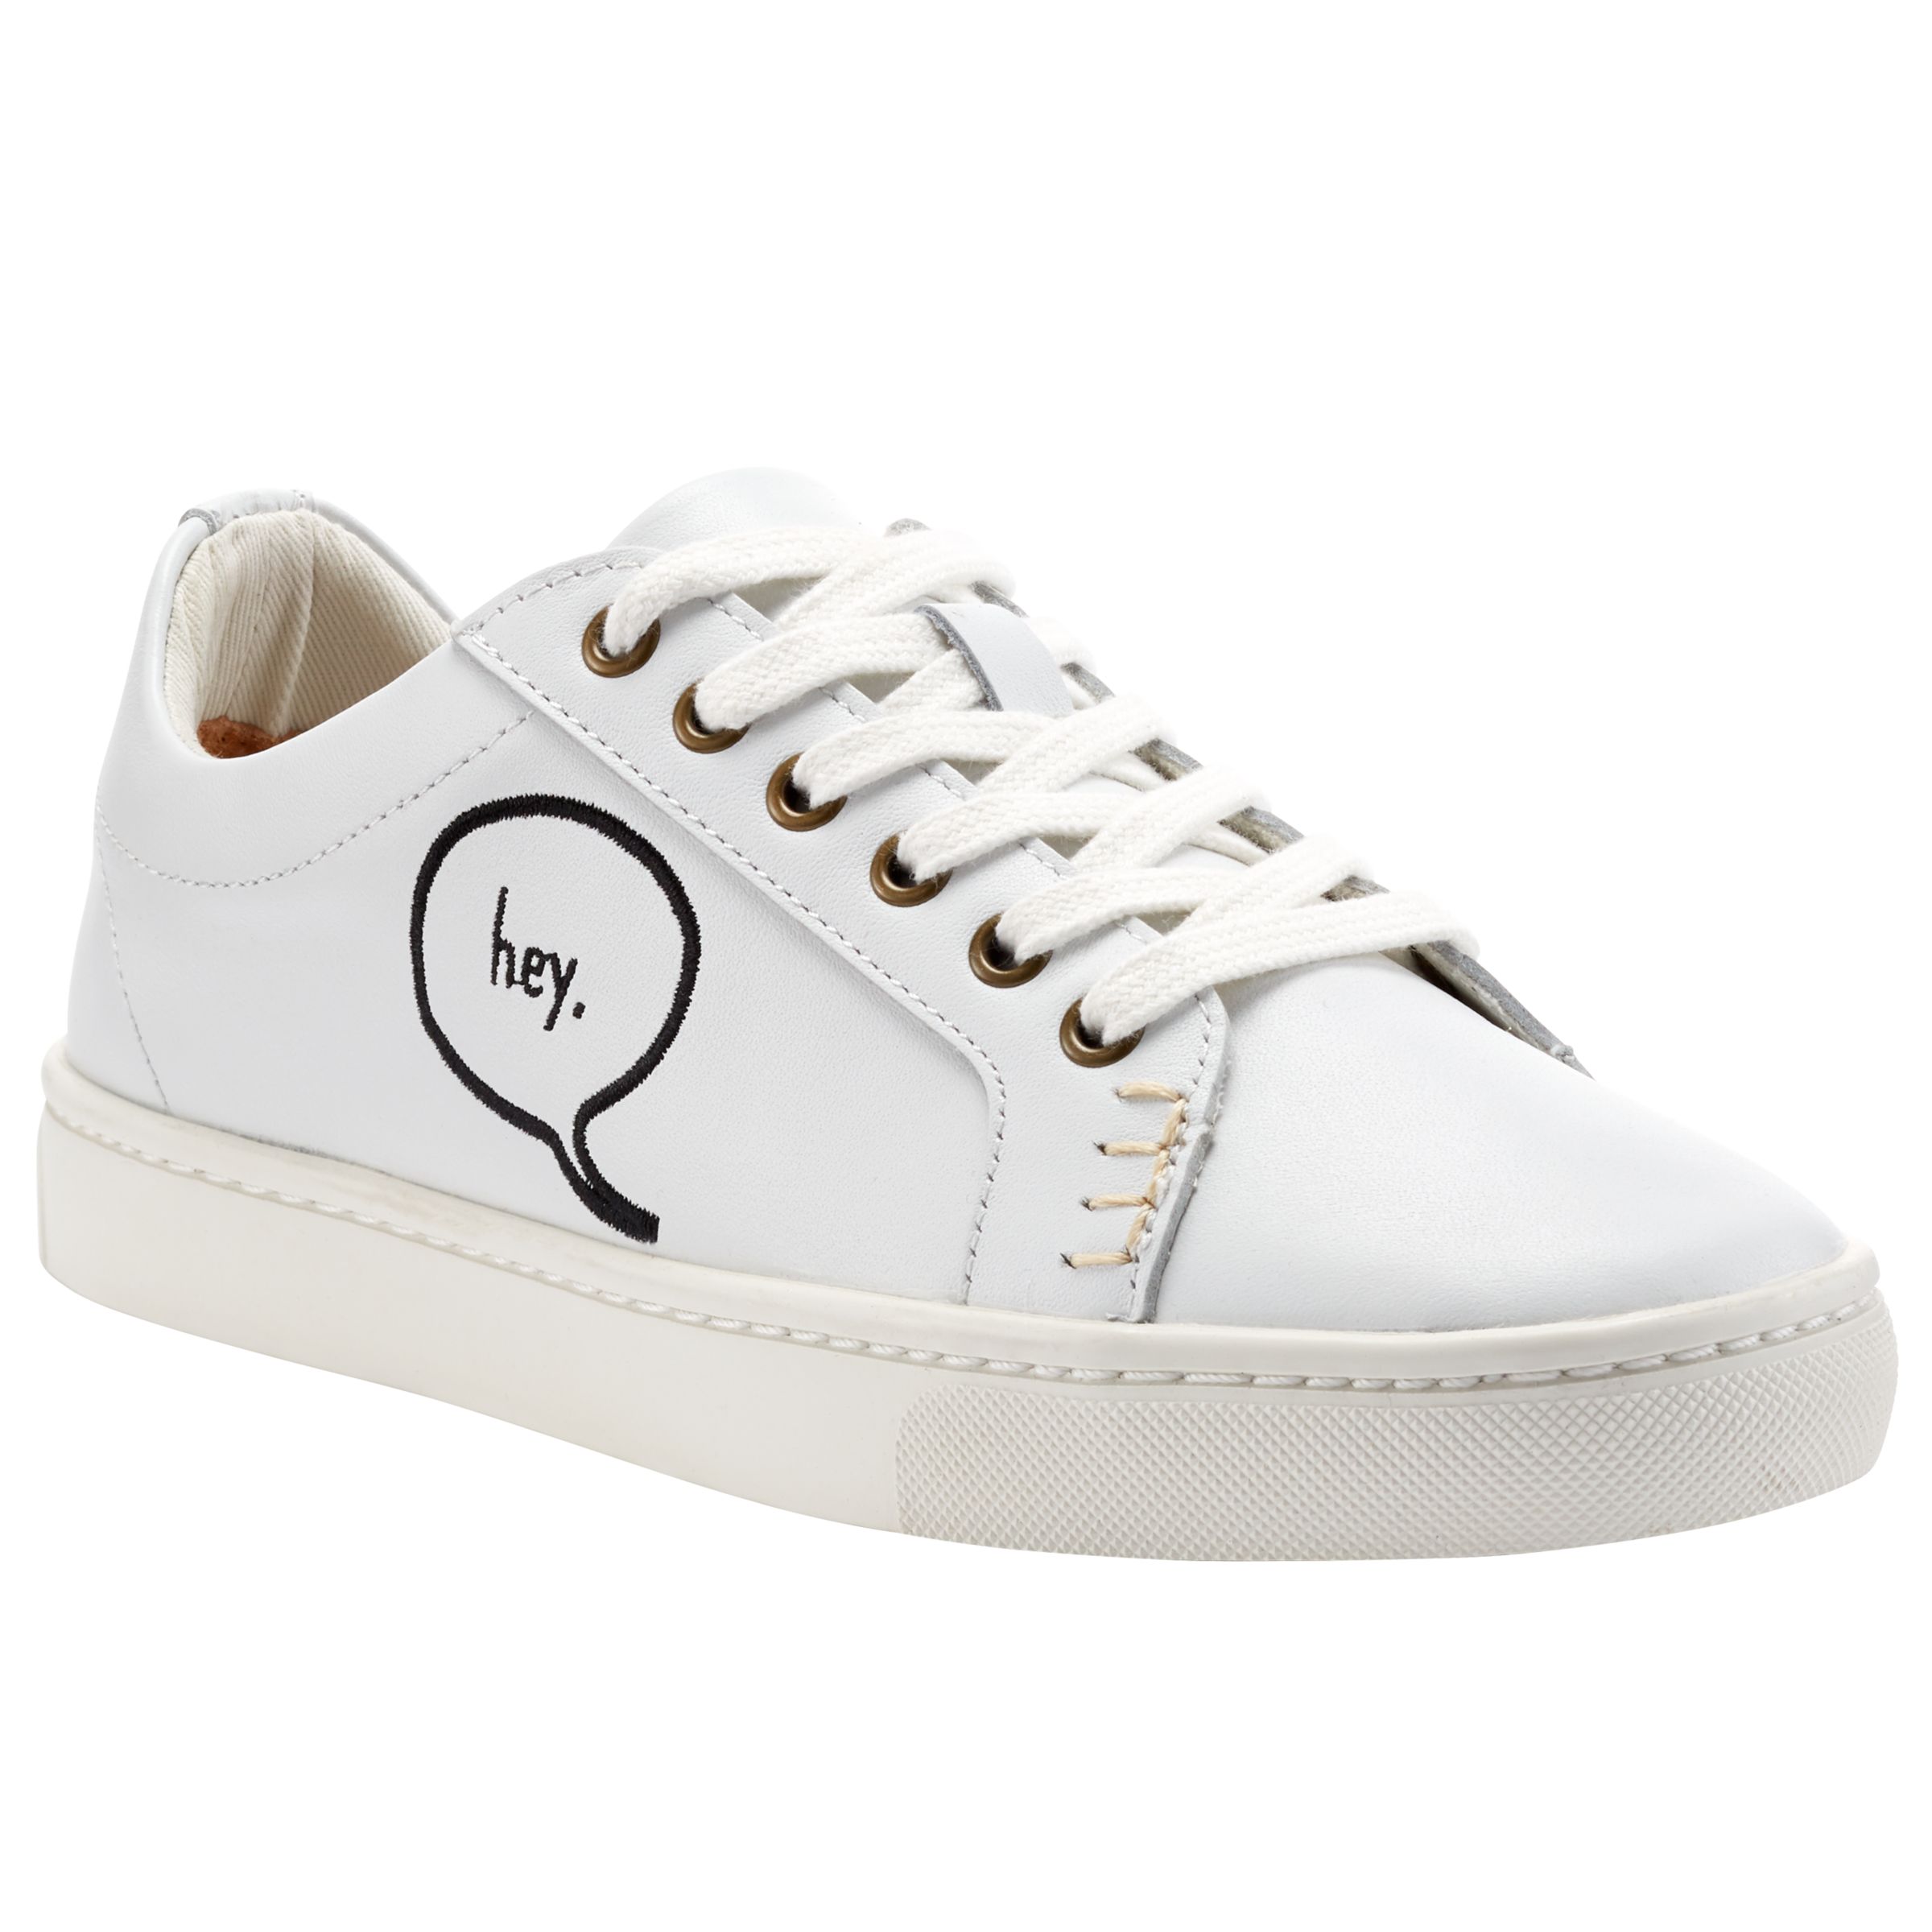 Soludos Embroidered Lace-Up Trainers, White, 7